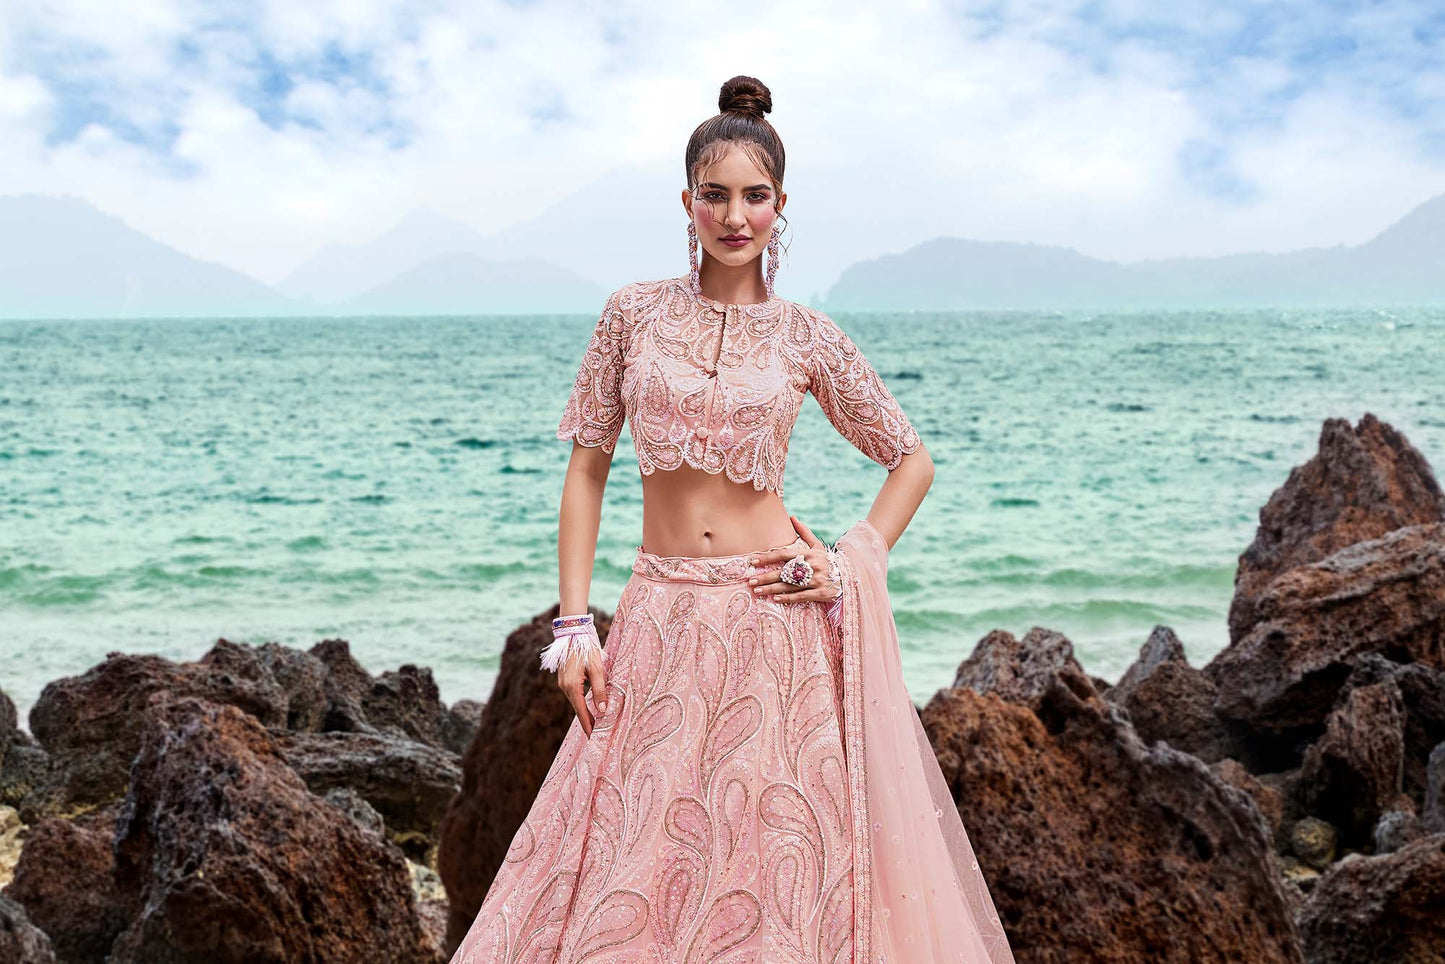 Coral Net Multi Sequins with heavy Zarkan embroidery Lehenga